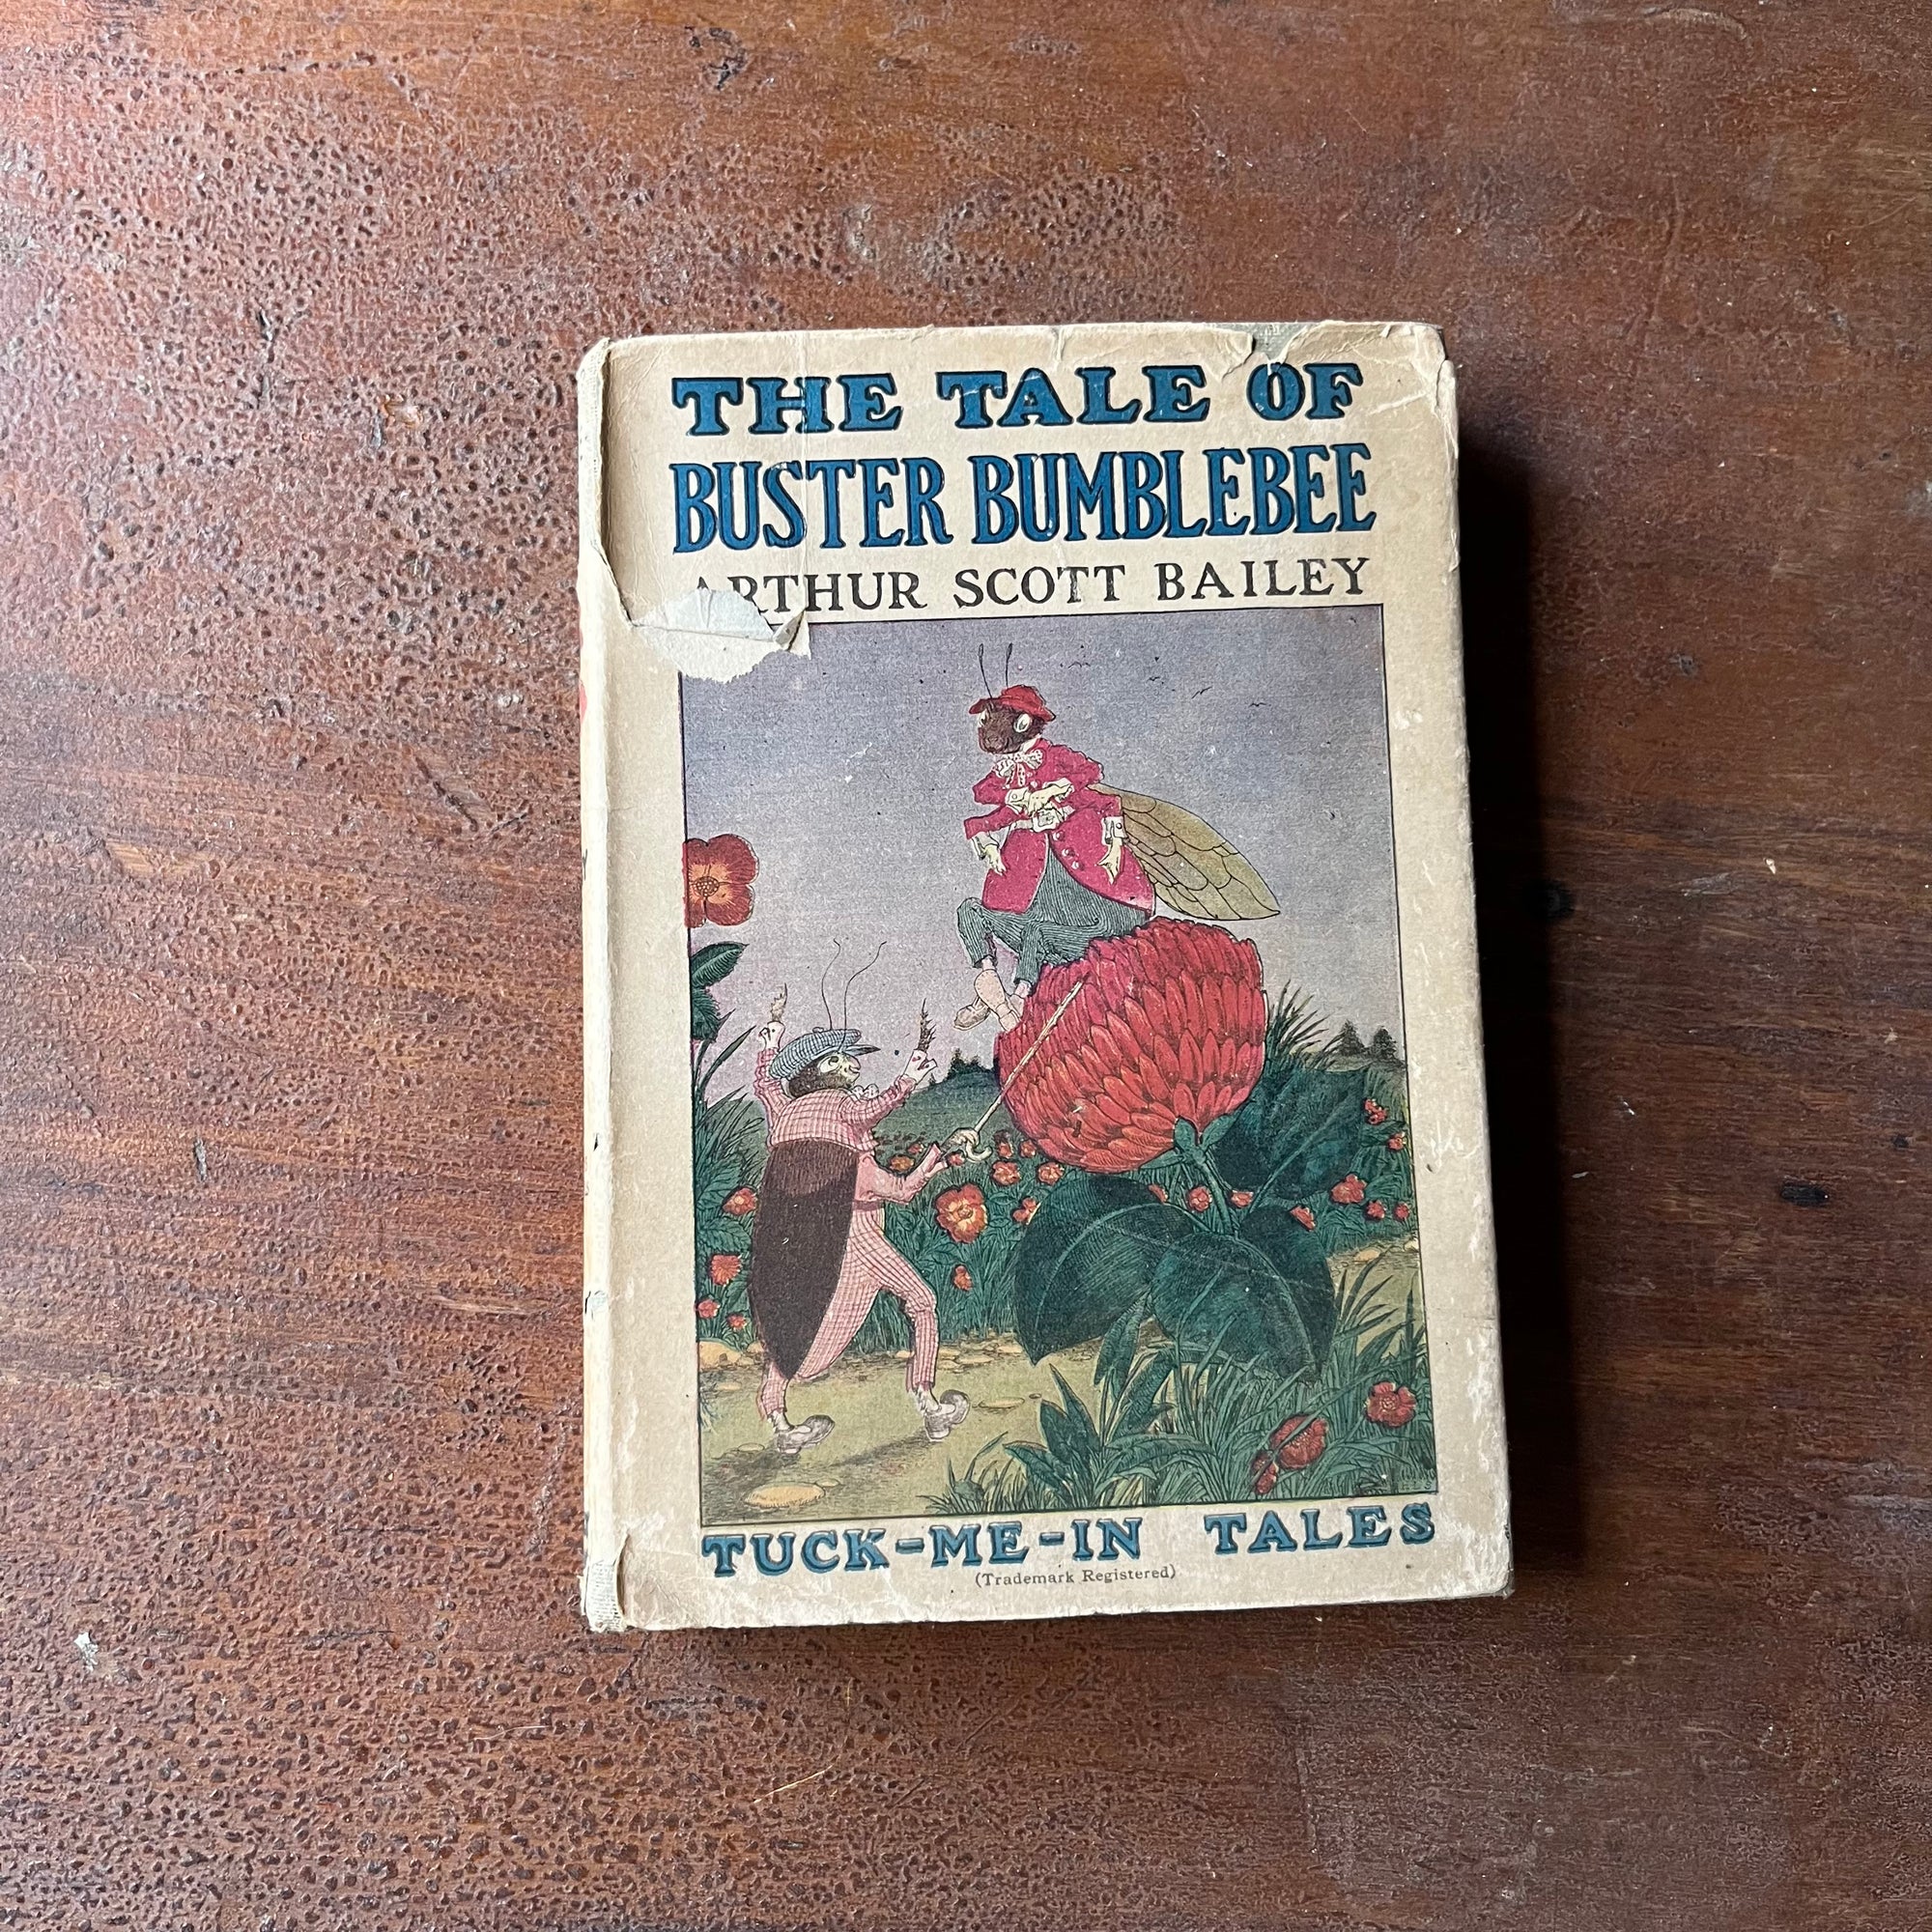 Log Cabin Vintage - vintage children's book, Tuck-Me-In Tales, read aloud books, bedtime stories - The Tale of Buster Bumblebee 1918 Edition by Arthur Scott Bailey with illustrations by Harry L. Smith - view of the dust jacket's front cover